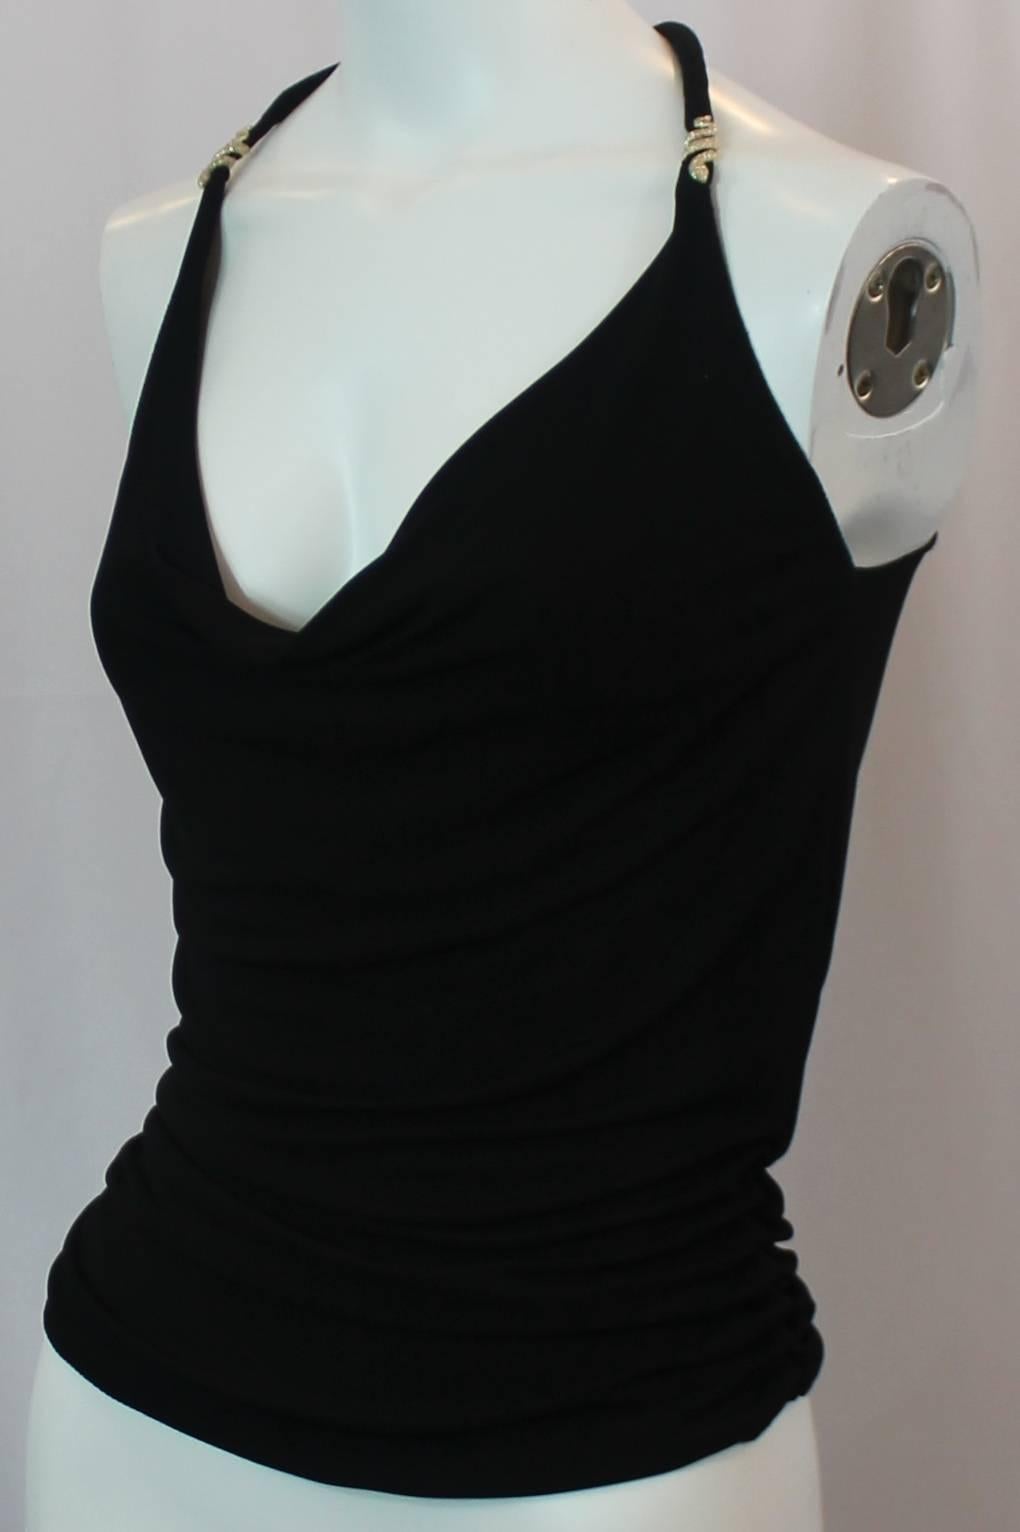 Roberto Cavalli Black Jersey Blend Loose Tank Top with Gold Snake Detail - 38. This loose tank top has a swoop neckline. It is black jersey/ viscose elastin blend. On the straps there are gold snake details. This top is in excellent condition.